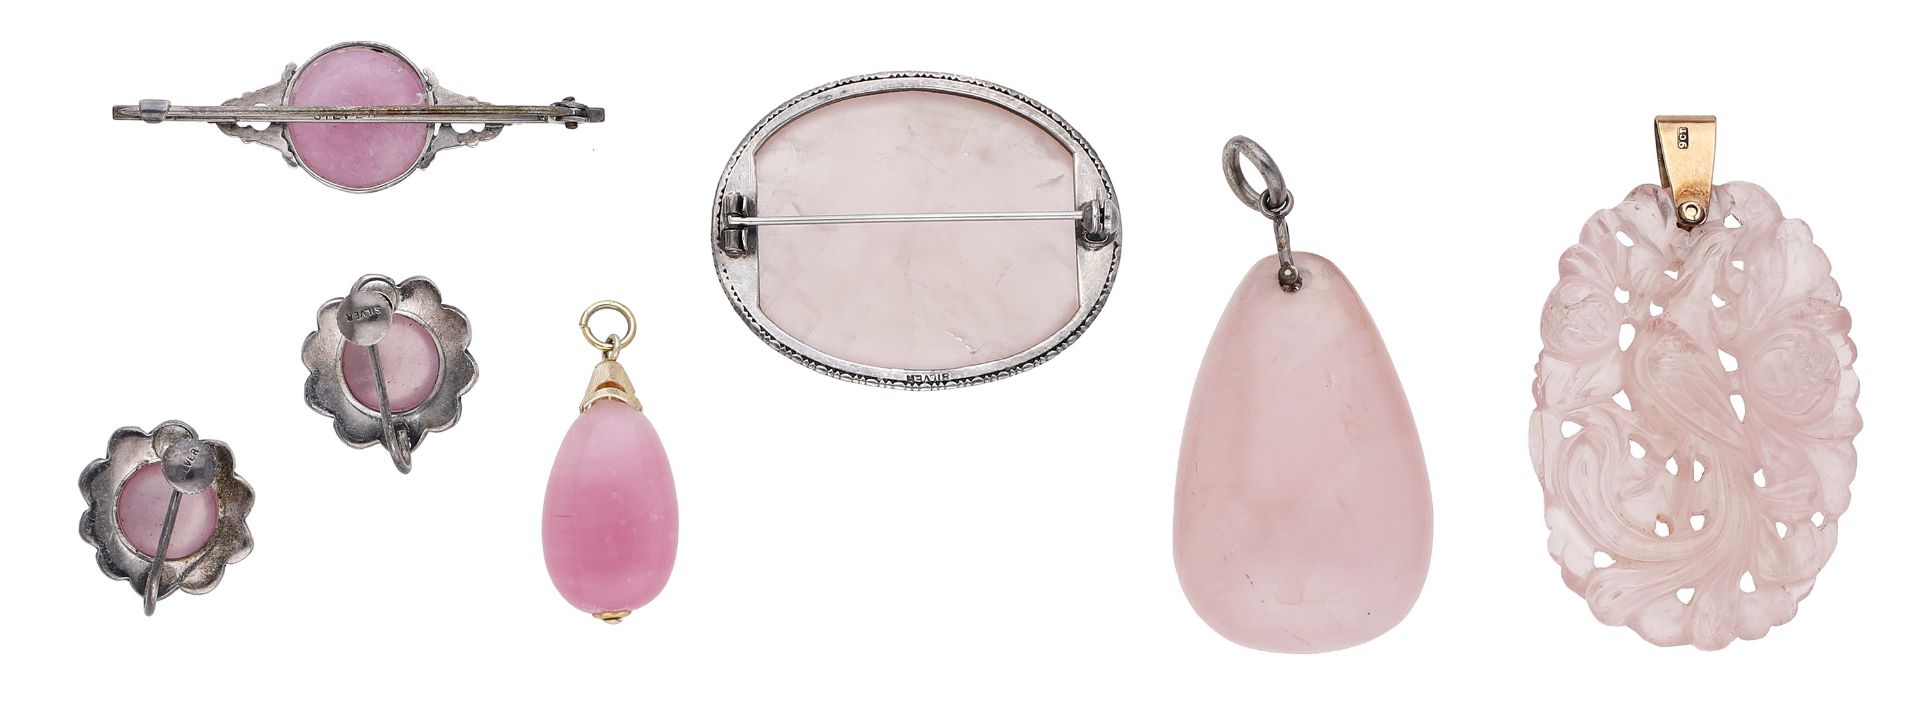 A collection of rose quartz jewellery, including bead necklaces, pendants, brooches and earr... - Image 2 of 3